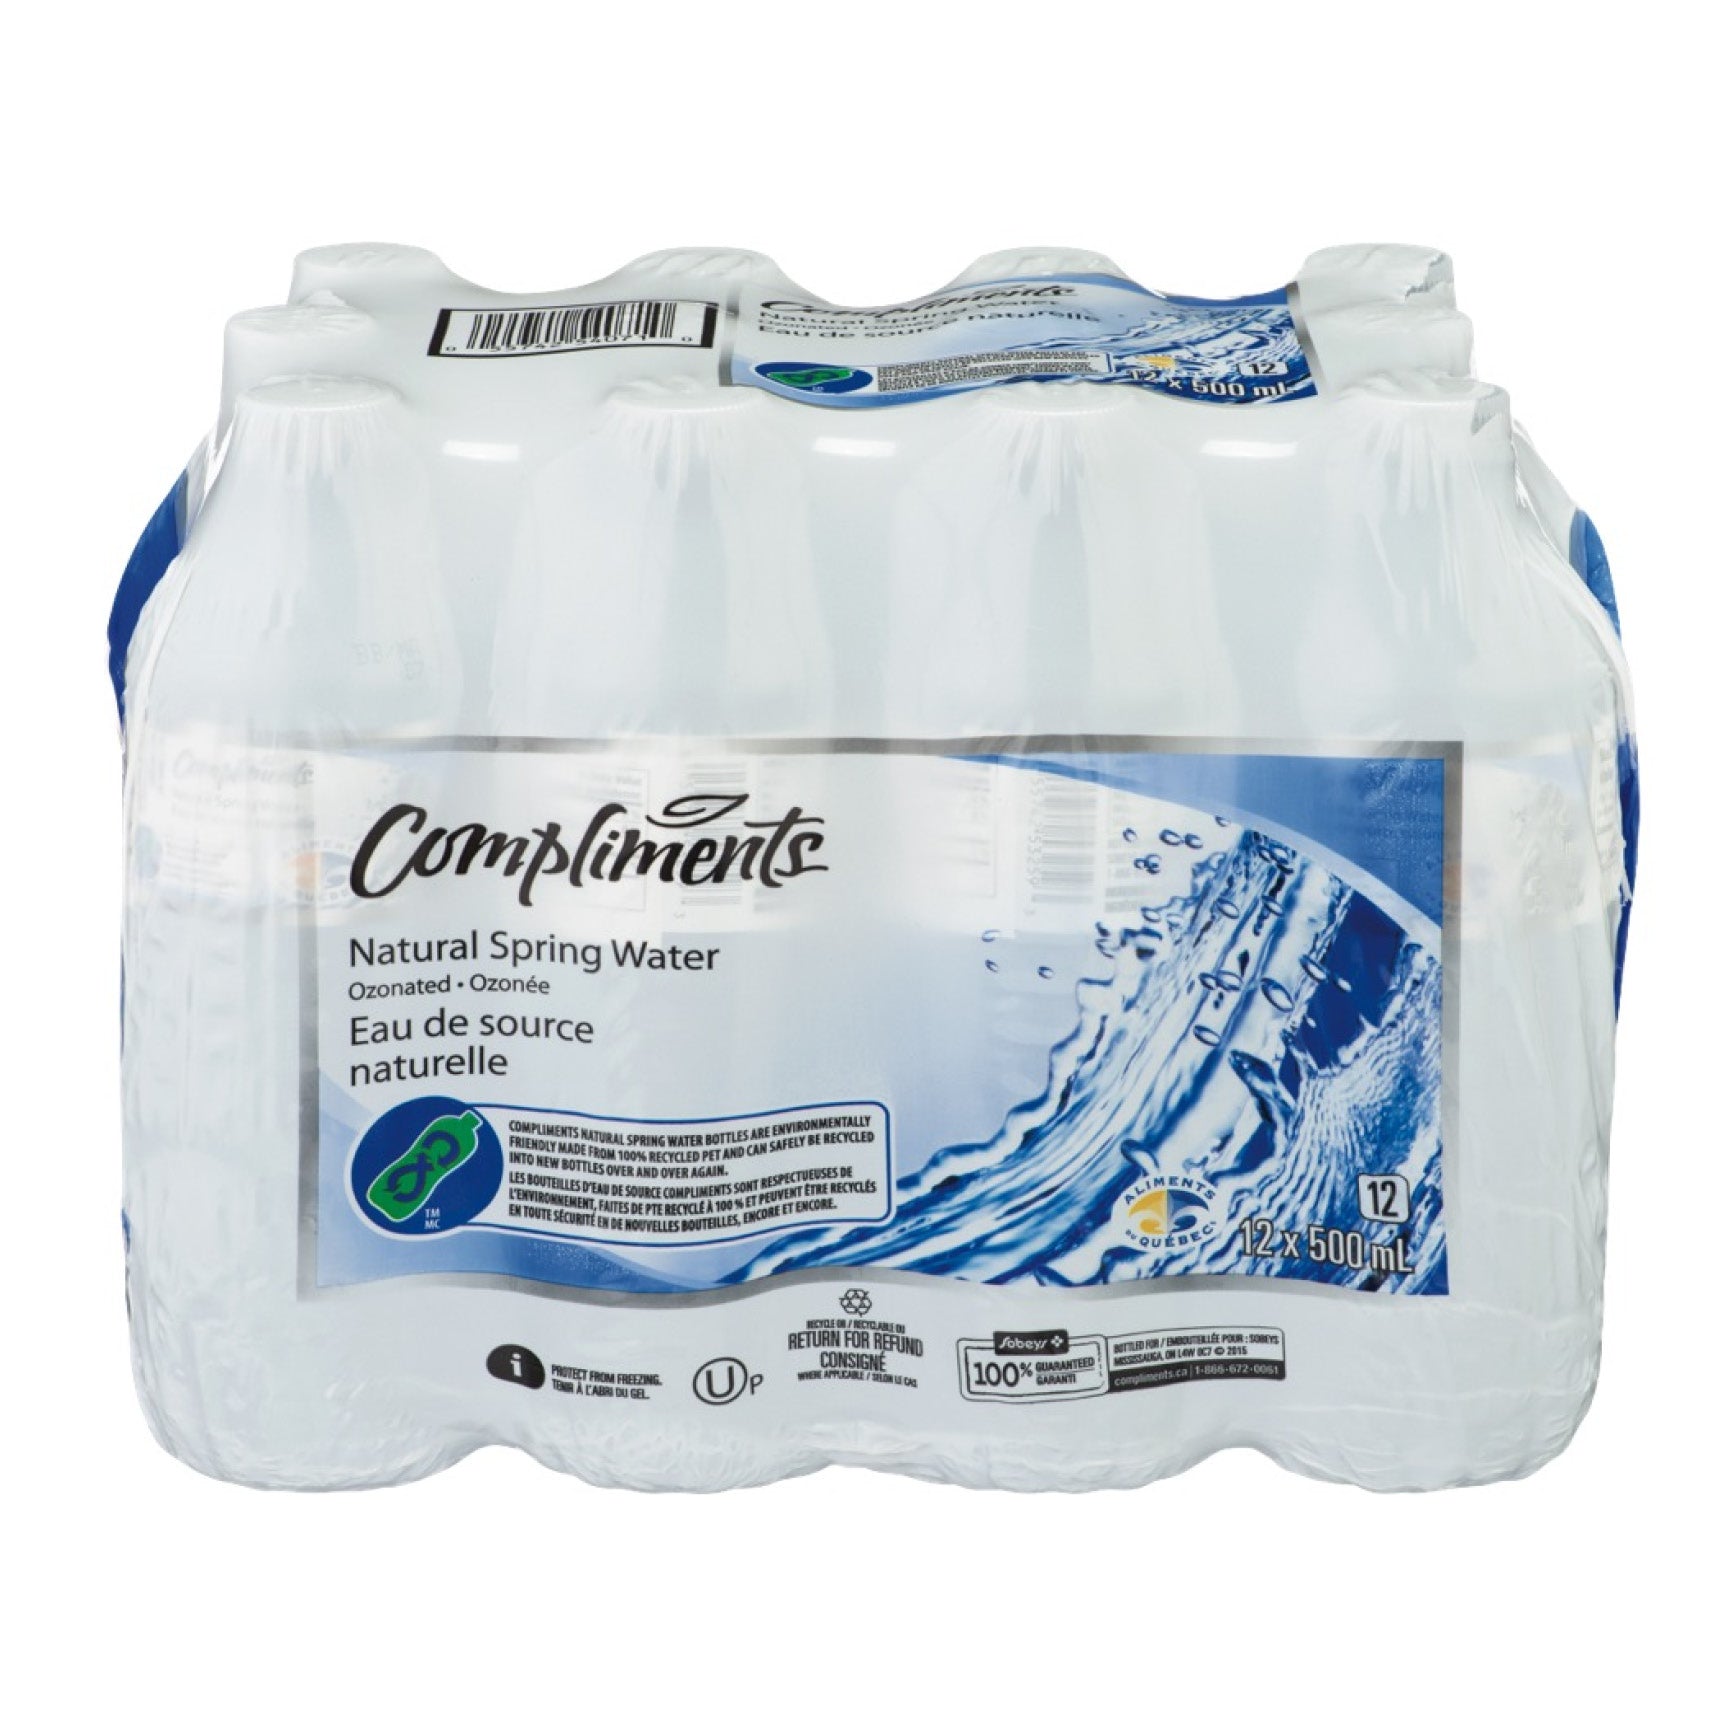 Compliments Spring Water, 500ml, 24pk